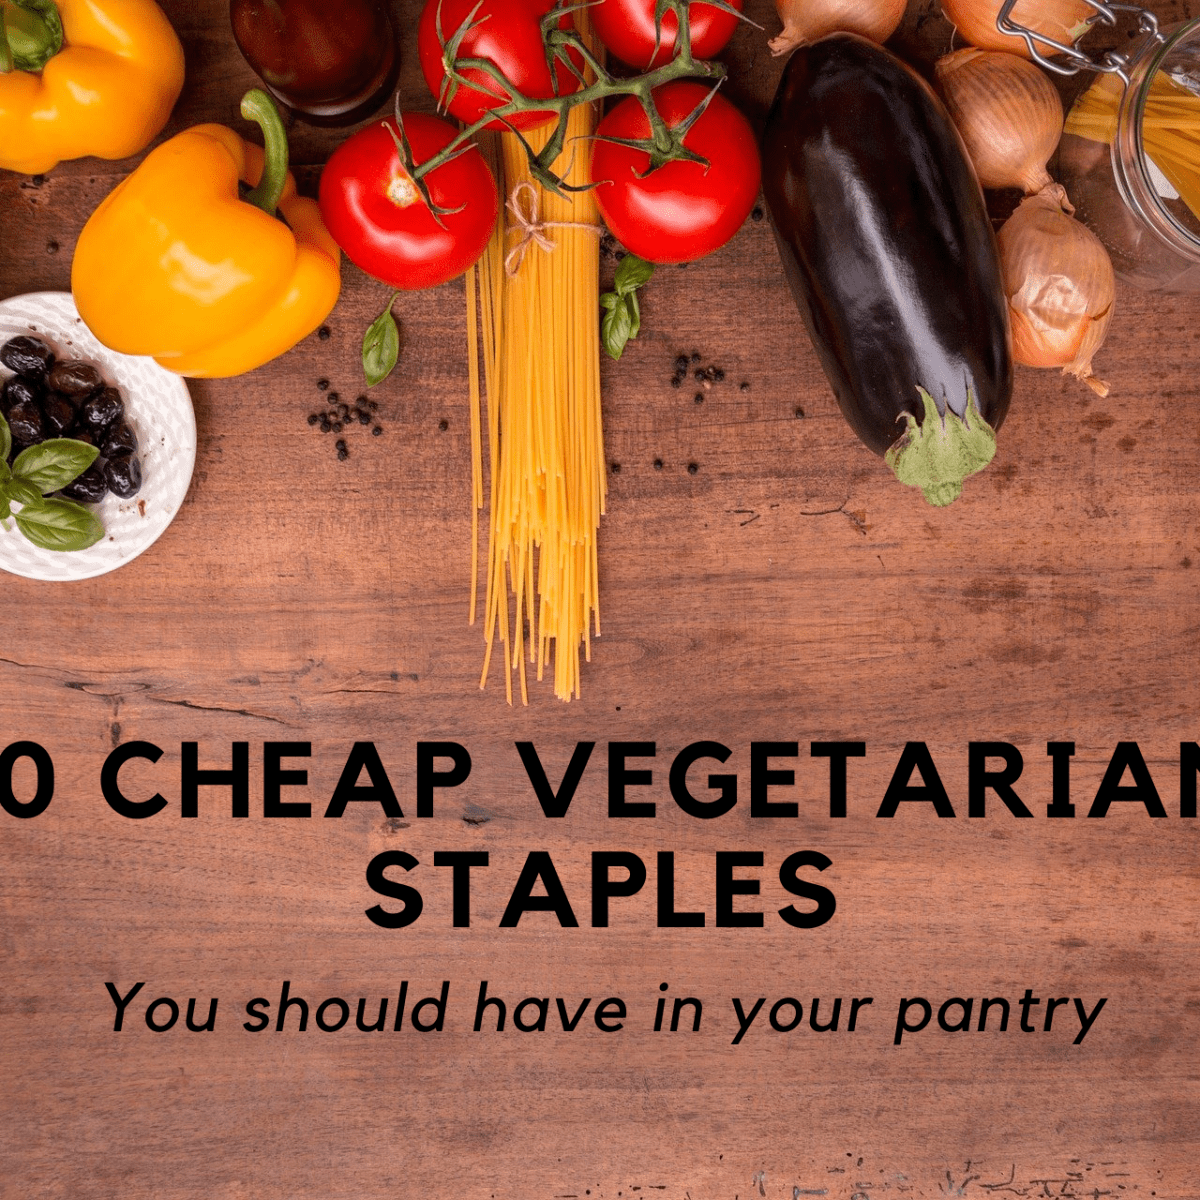 https://images.saymedia-content.com/.image/ar_1:1%2Cc_fill%2Ccs_srgb%2Cq_auto:eco%2Cw_1200/MTc5MzQ3MzY2NjQwNDI4NzM5/10-cheap-vegetarian-staples-you-need-to-have-in-your-pantry.png